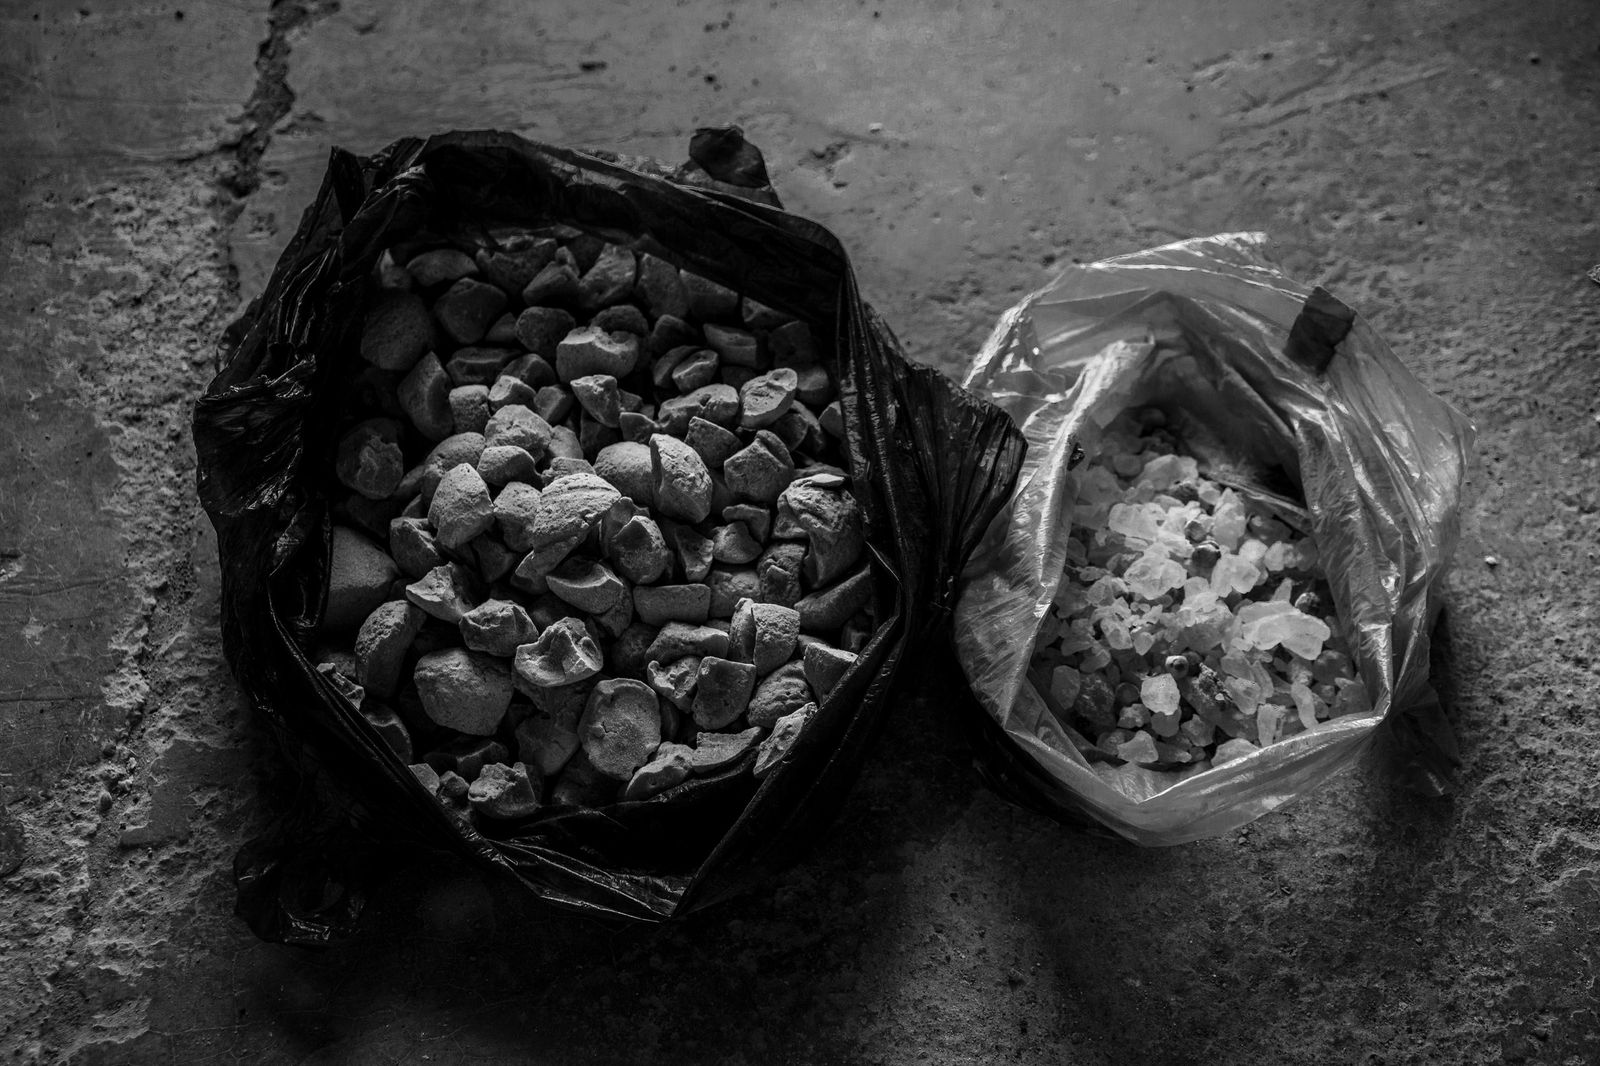 © Zobair Movahhed - Curds and sweets in plastic bags that are used as sustenance fry Afghan refugees during their treks into Iran.